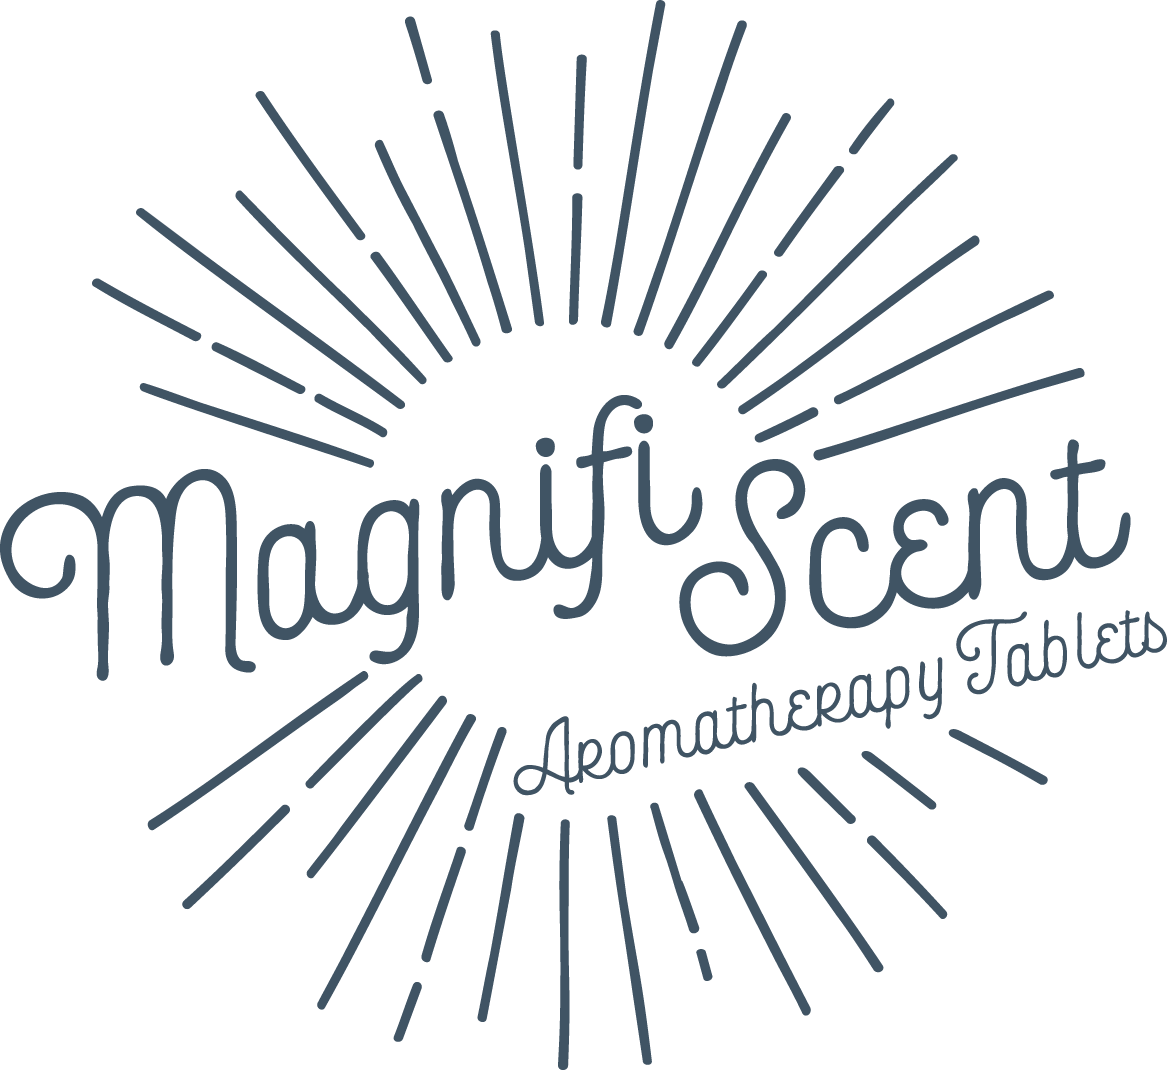 Magnifiscent Aromatherapy